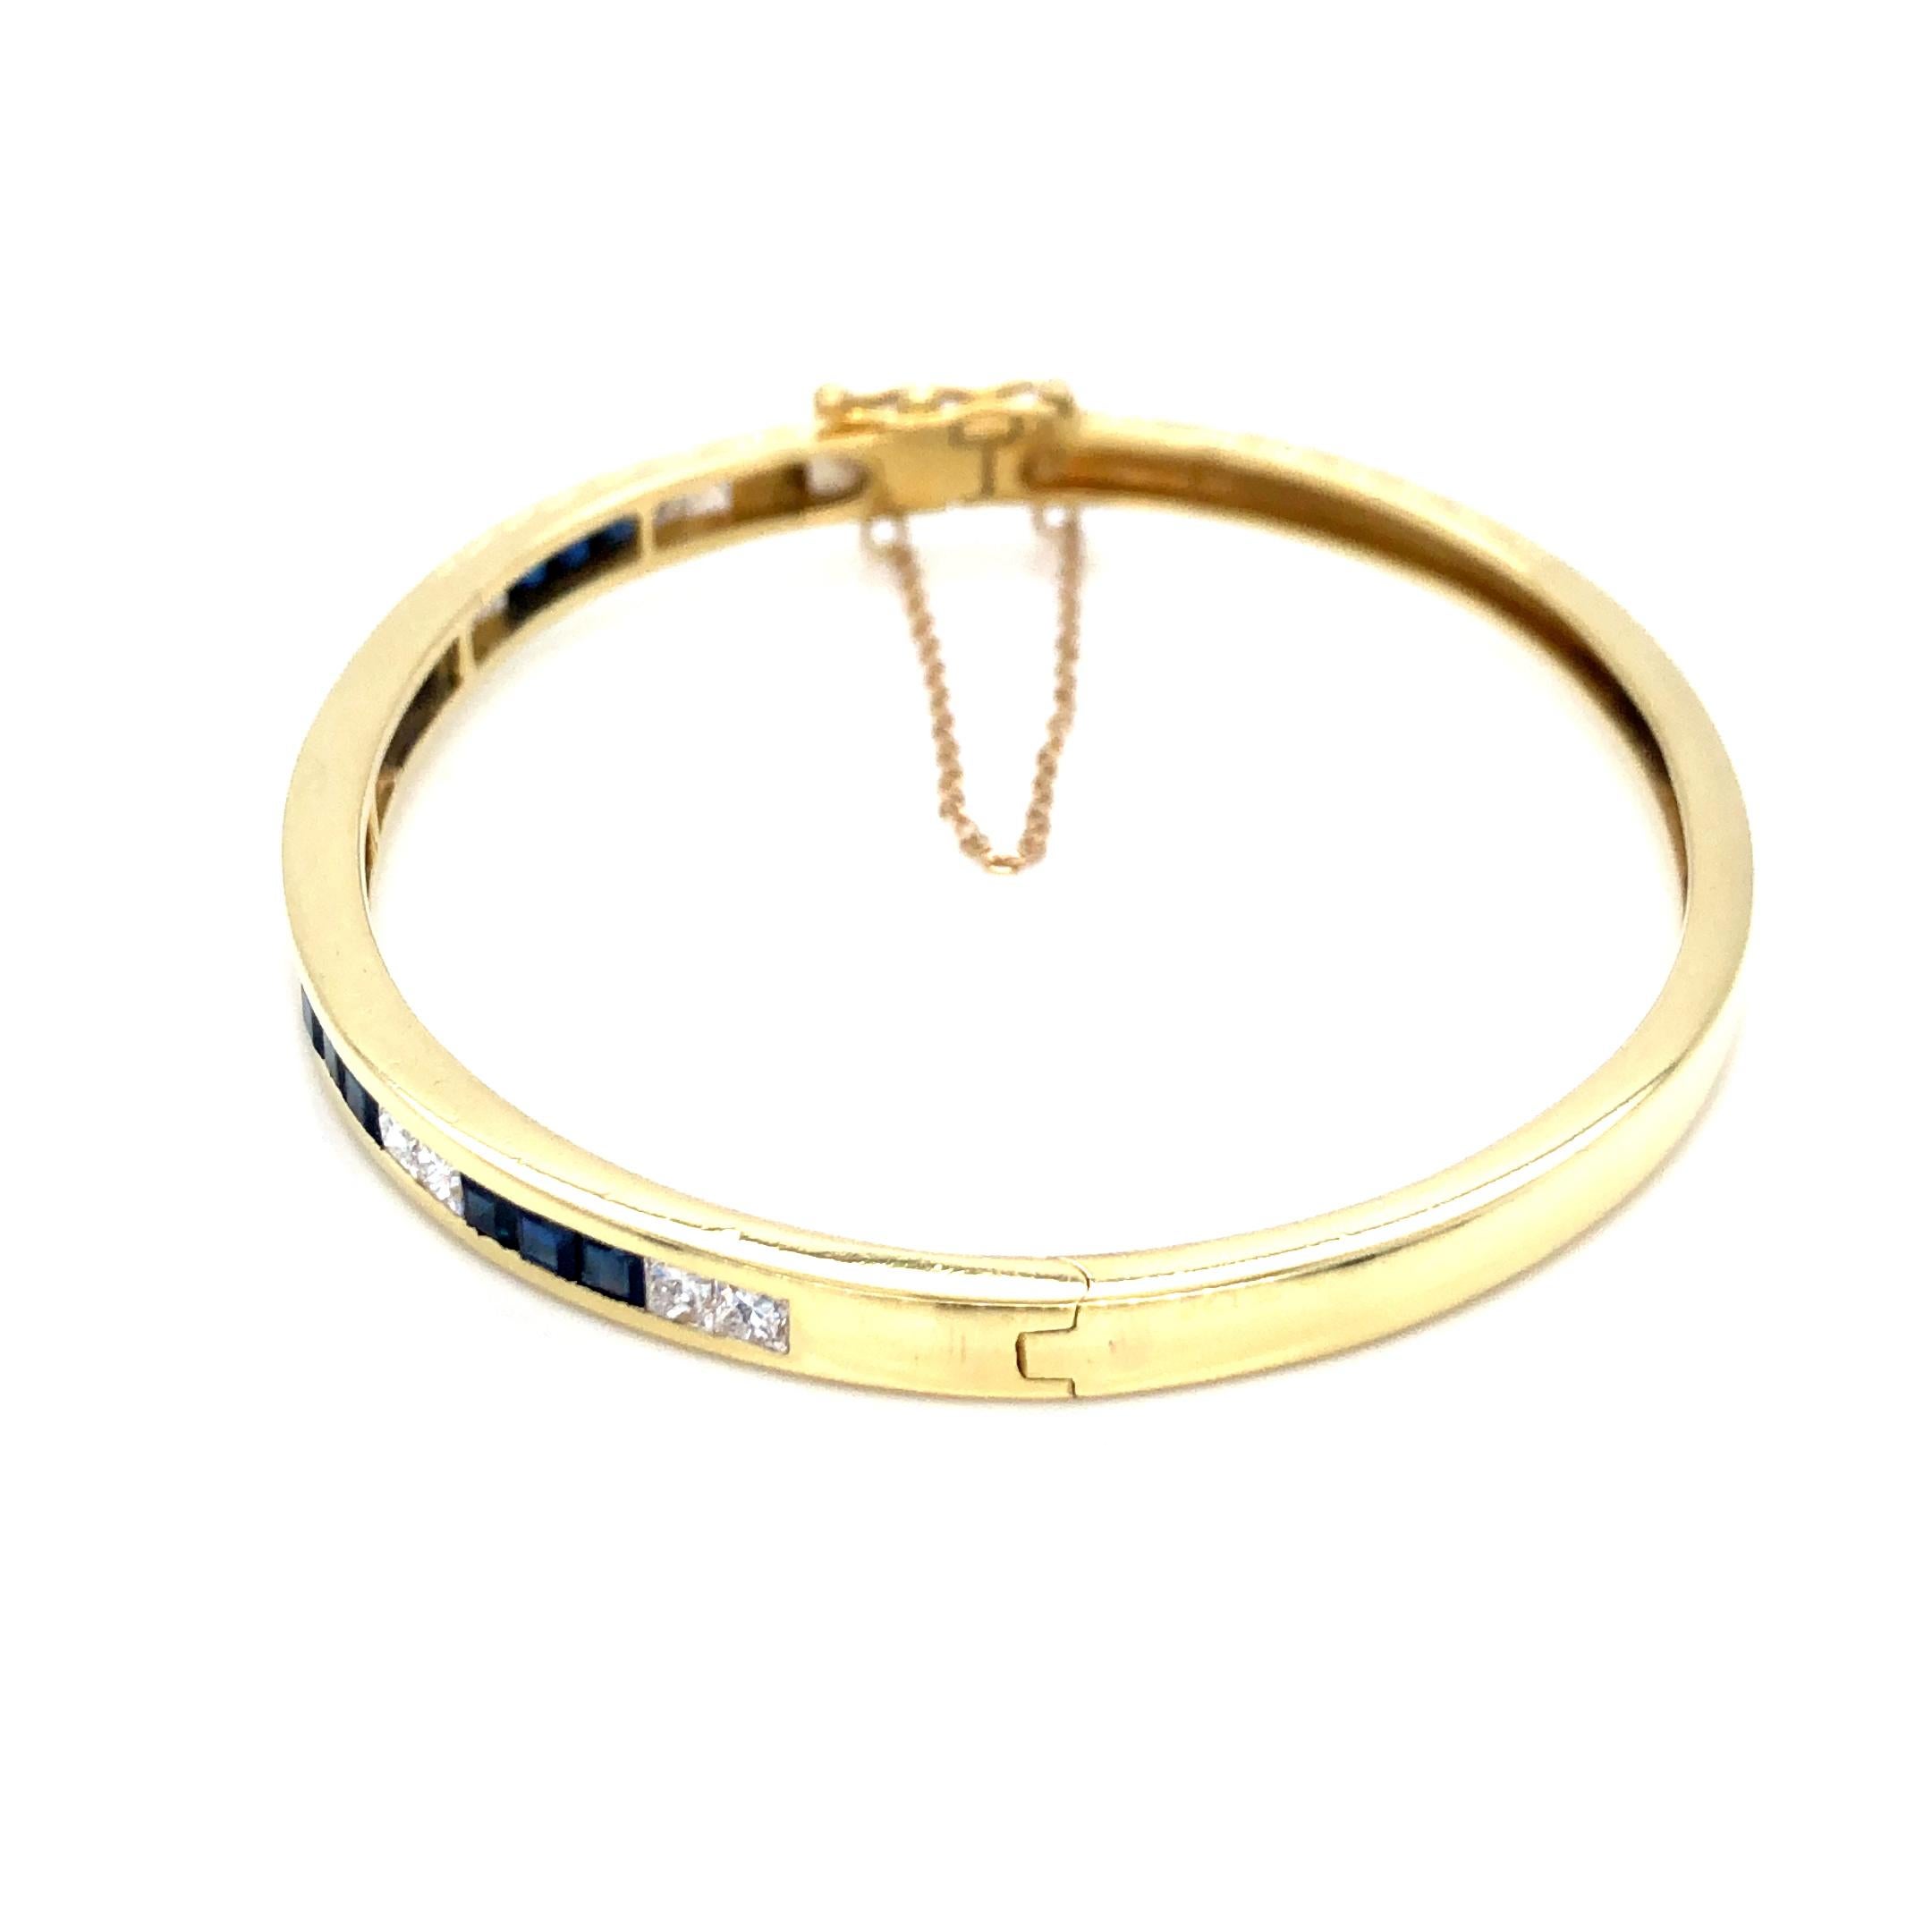 Channel Set Sapphire and Diamond Bangle in 18K Yellow Gold. The bracelet features 15 square cut blue sapphires and 12 square cut diamonds. Diameter 6.75 inches.
19.27 Grams
4.85mm Wide